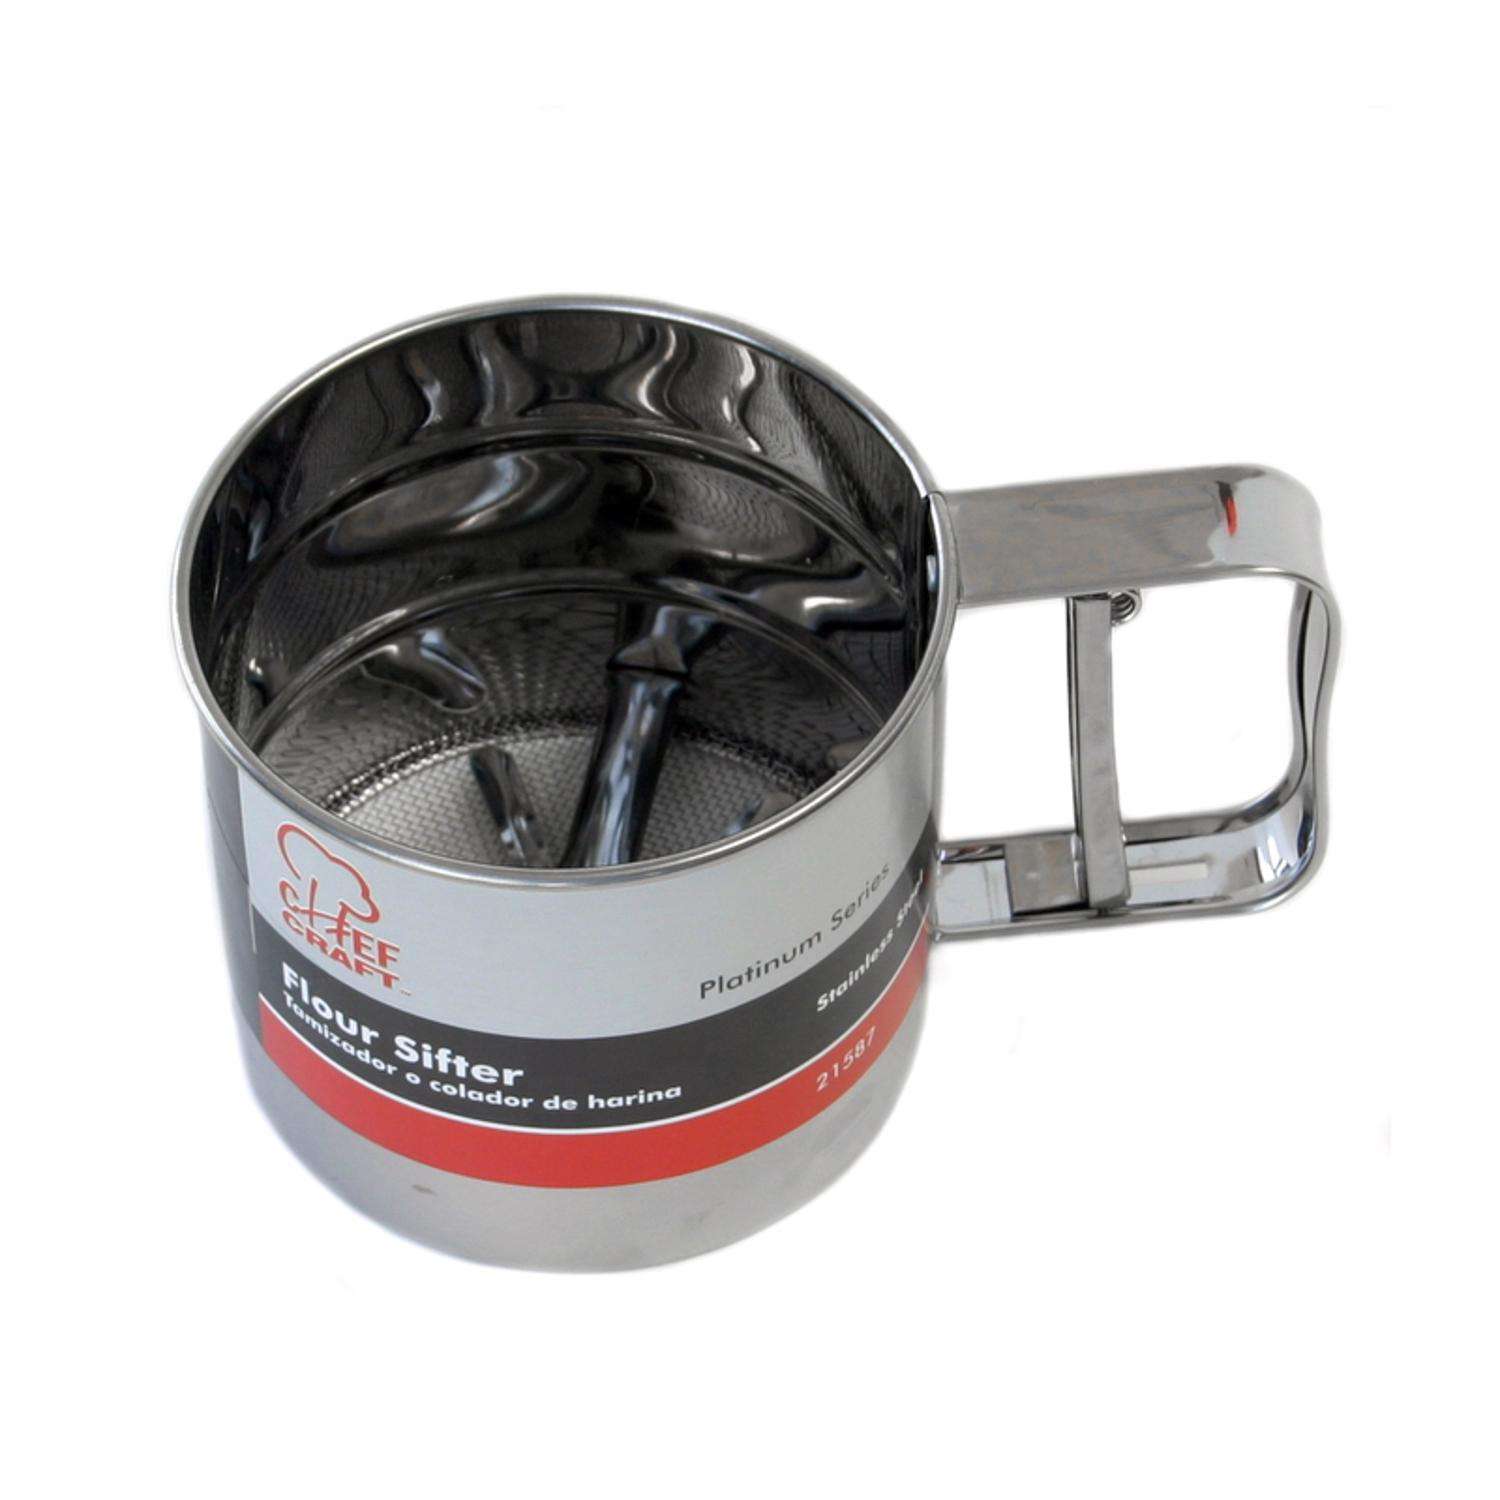 BATTERY POWERED FLOUR SIFTER * CORDLESS ELECTRIC * HAND-HELD * NEW